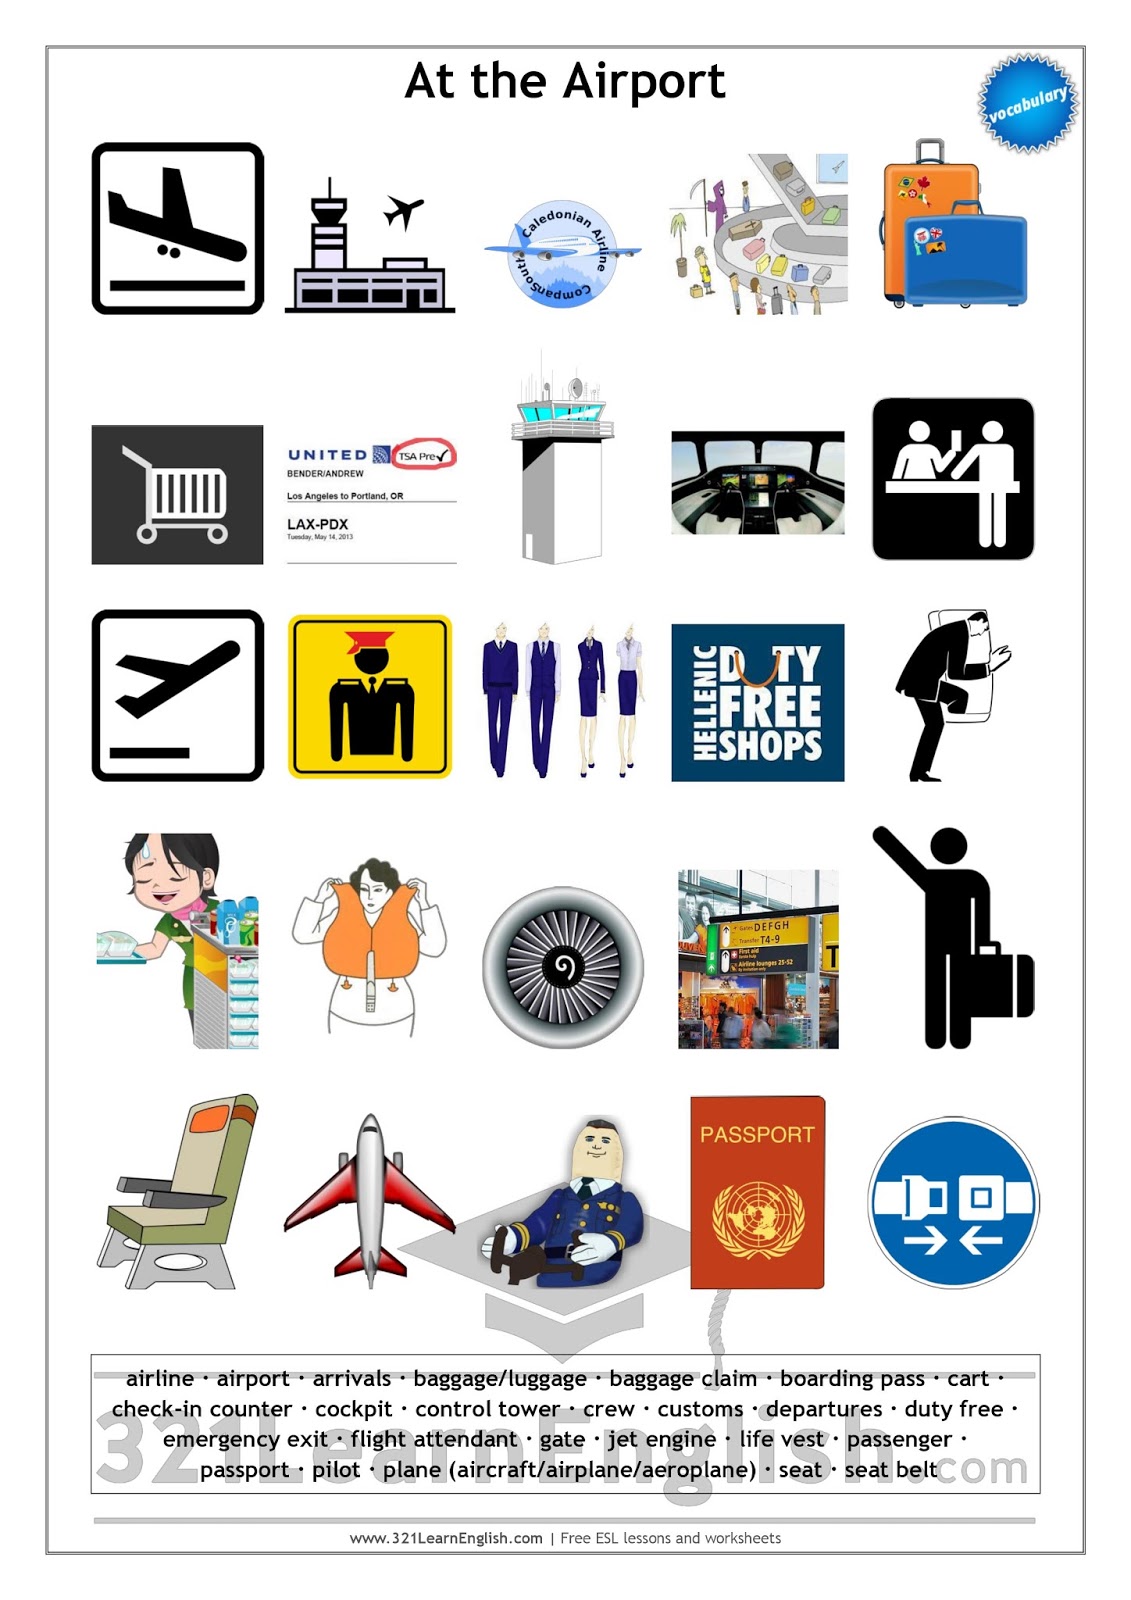 321 Learn English.com: Vocabulary: At the Airport (Level: B1)